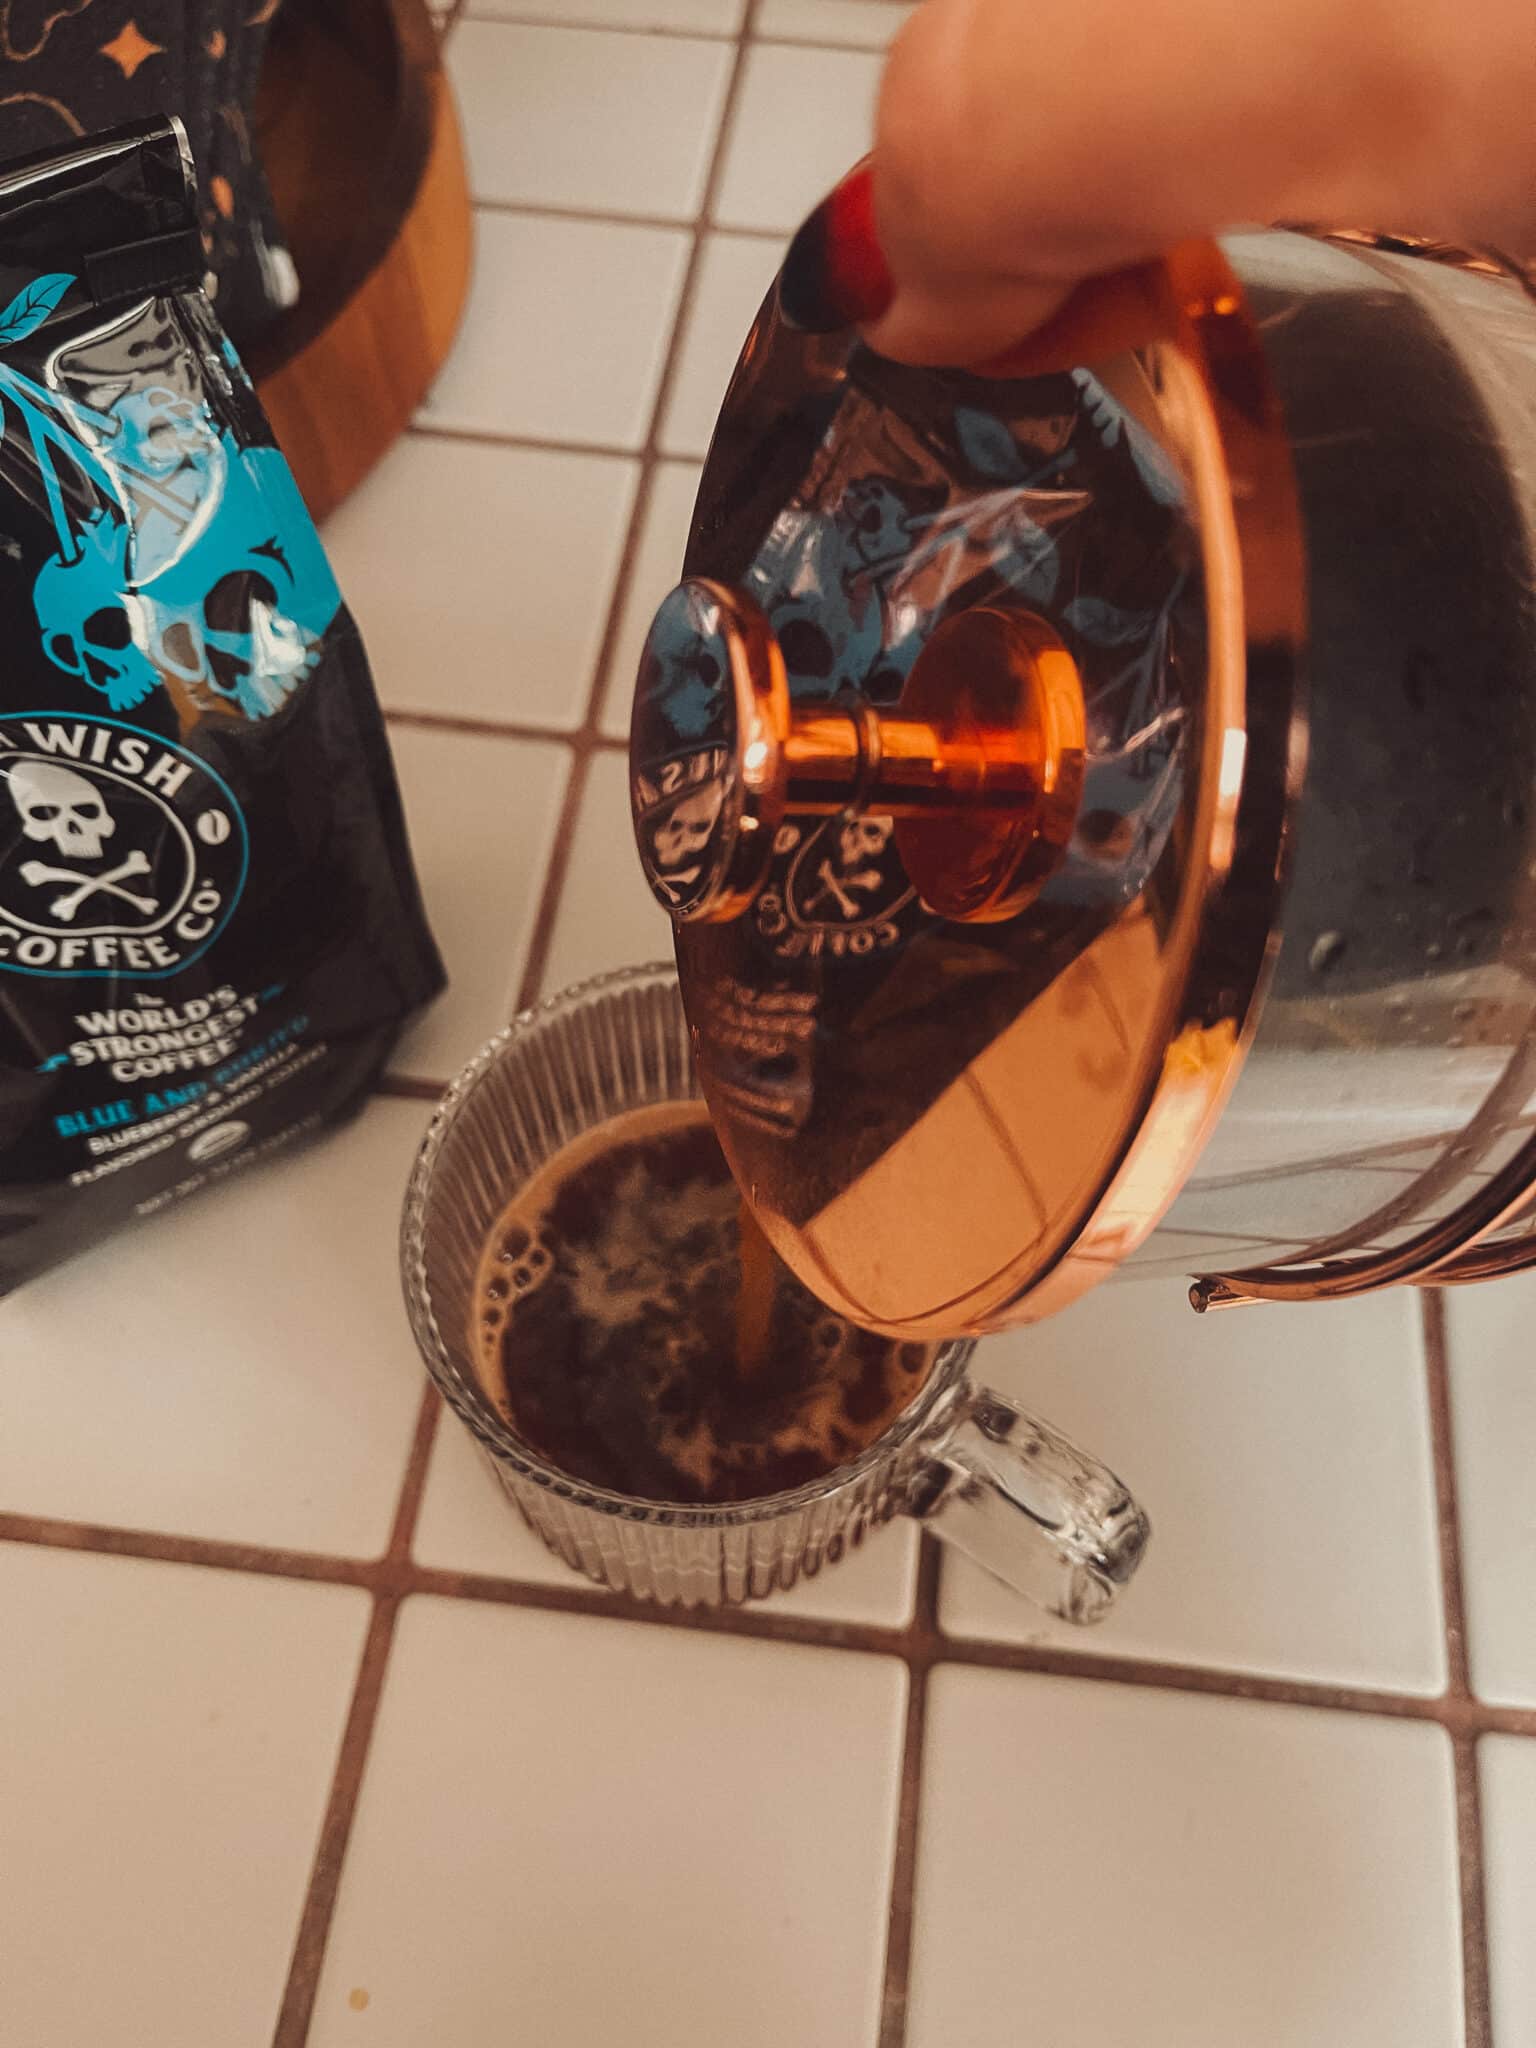  Death Wish Coffee Blue and Buried blend